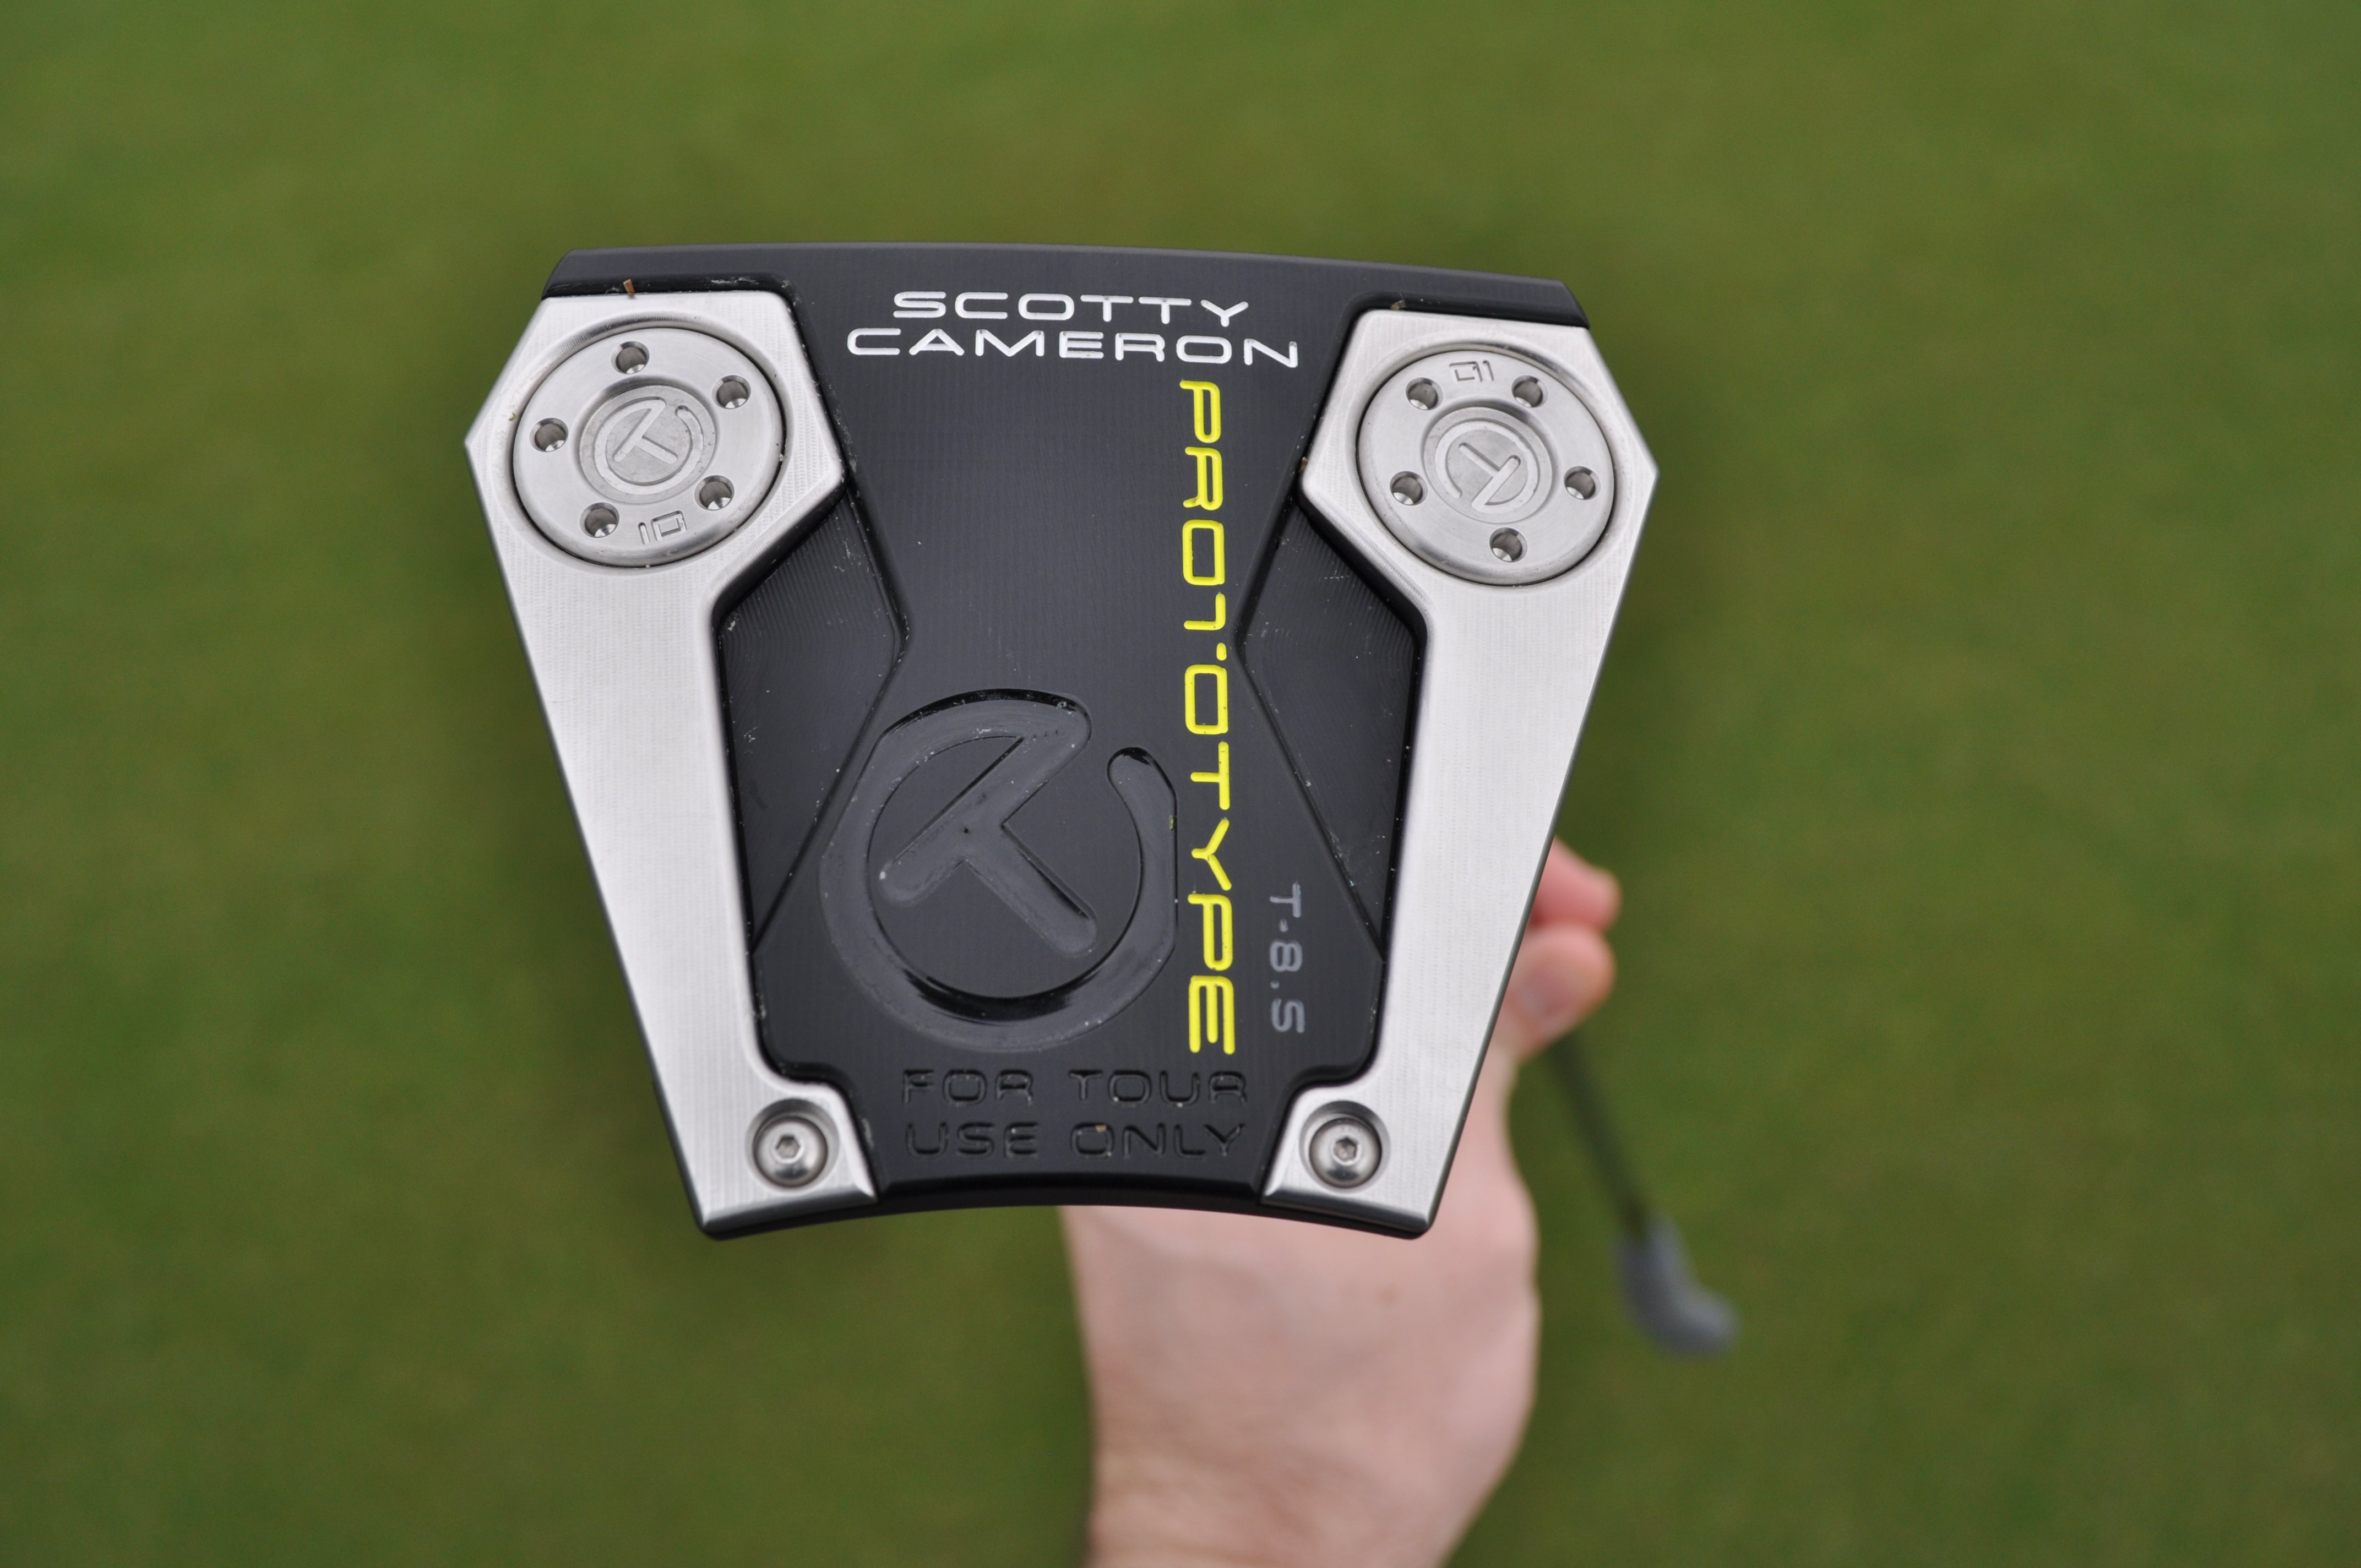 Scotty Cameron's T-8.5 Prototype putter is known as Phantom X at retail. 